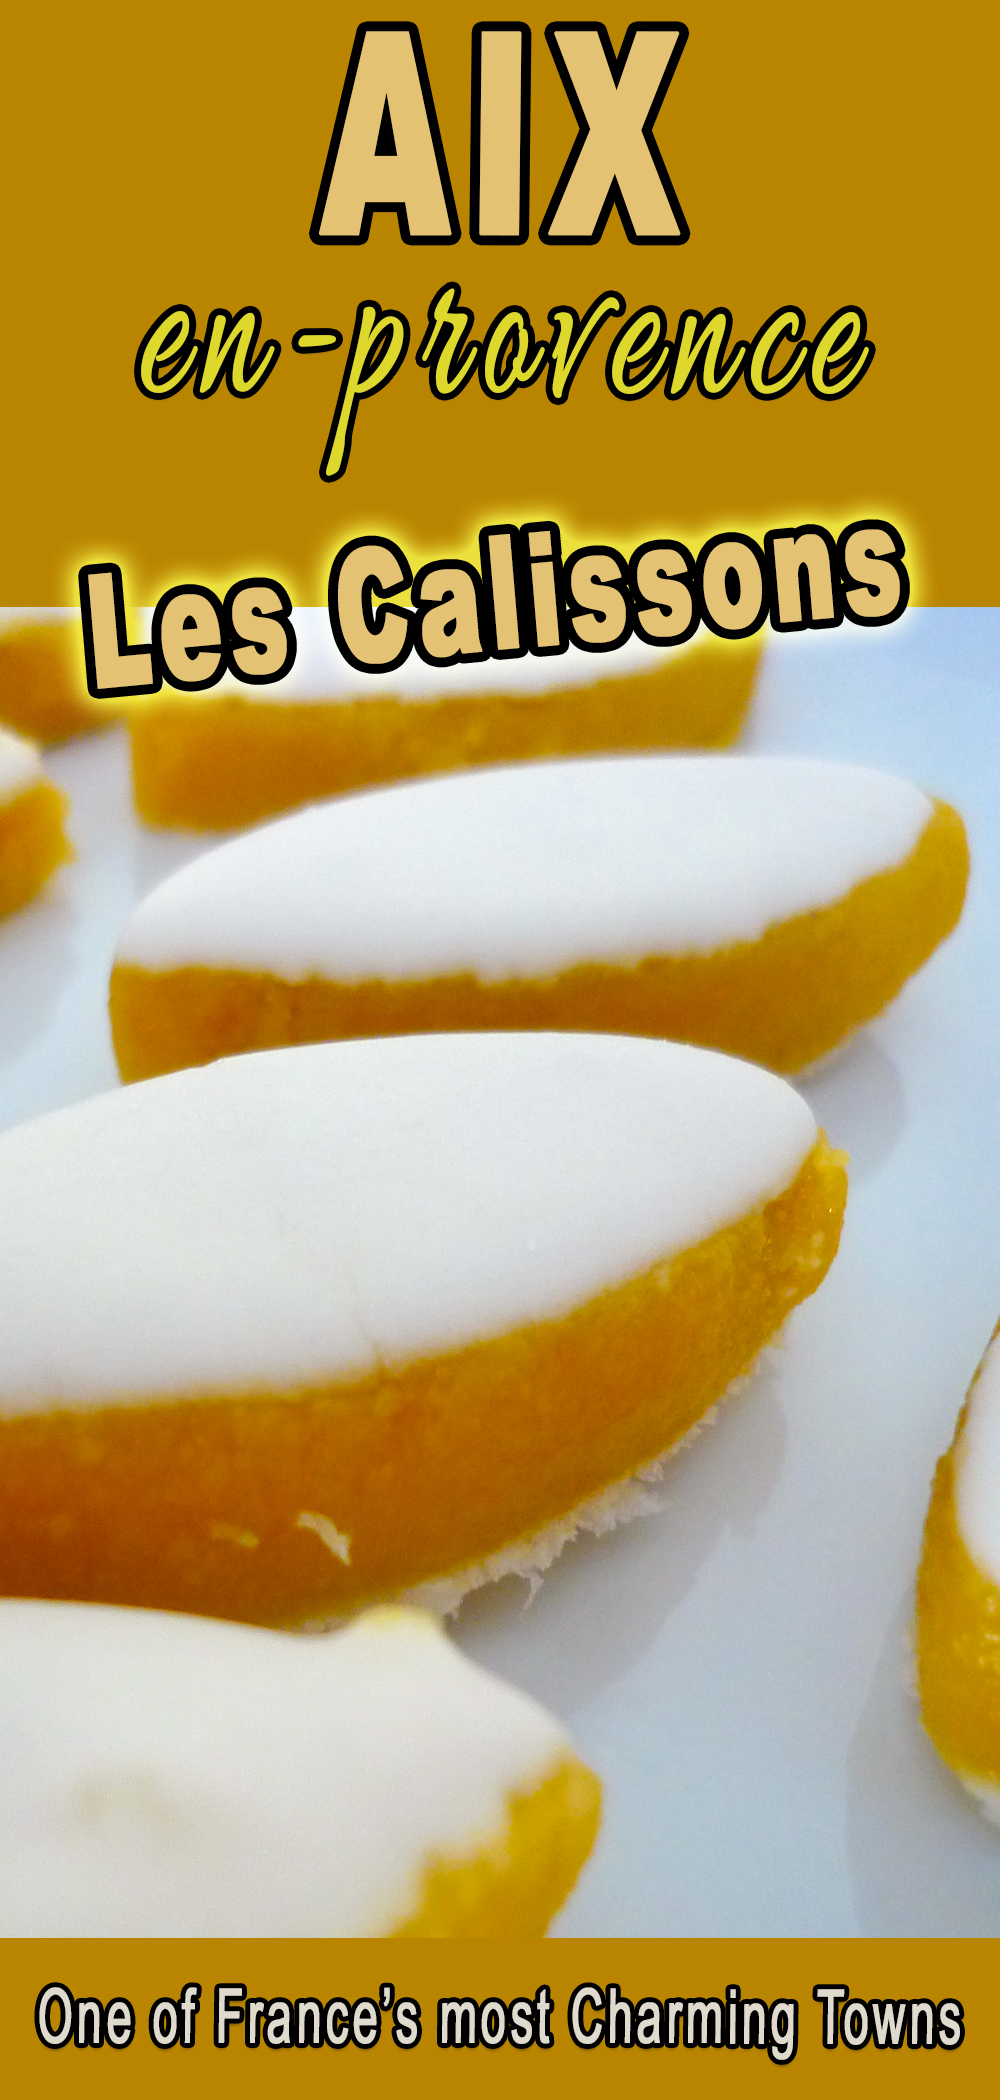 The Calissons of Aix: a Specialty Candy from Provence - French Moments